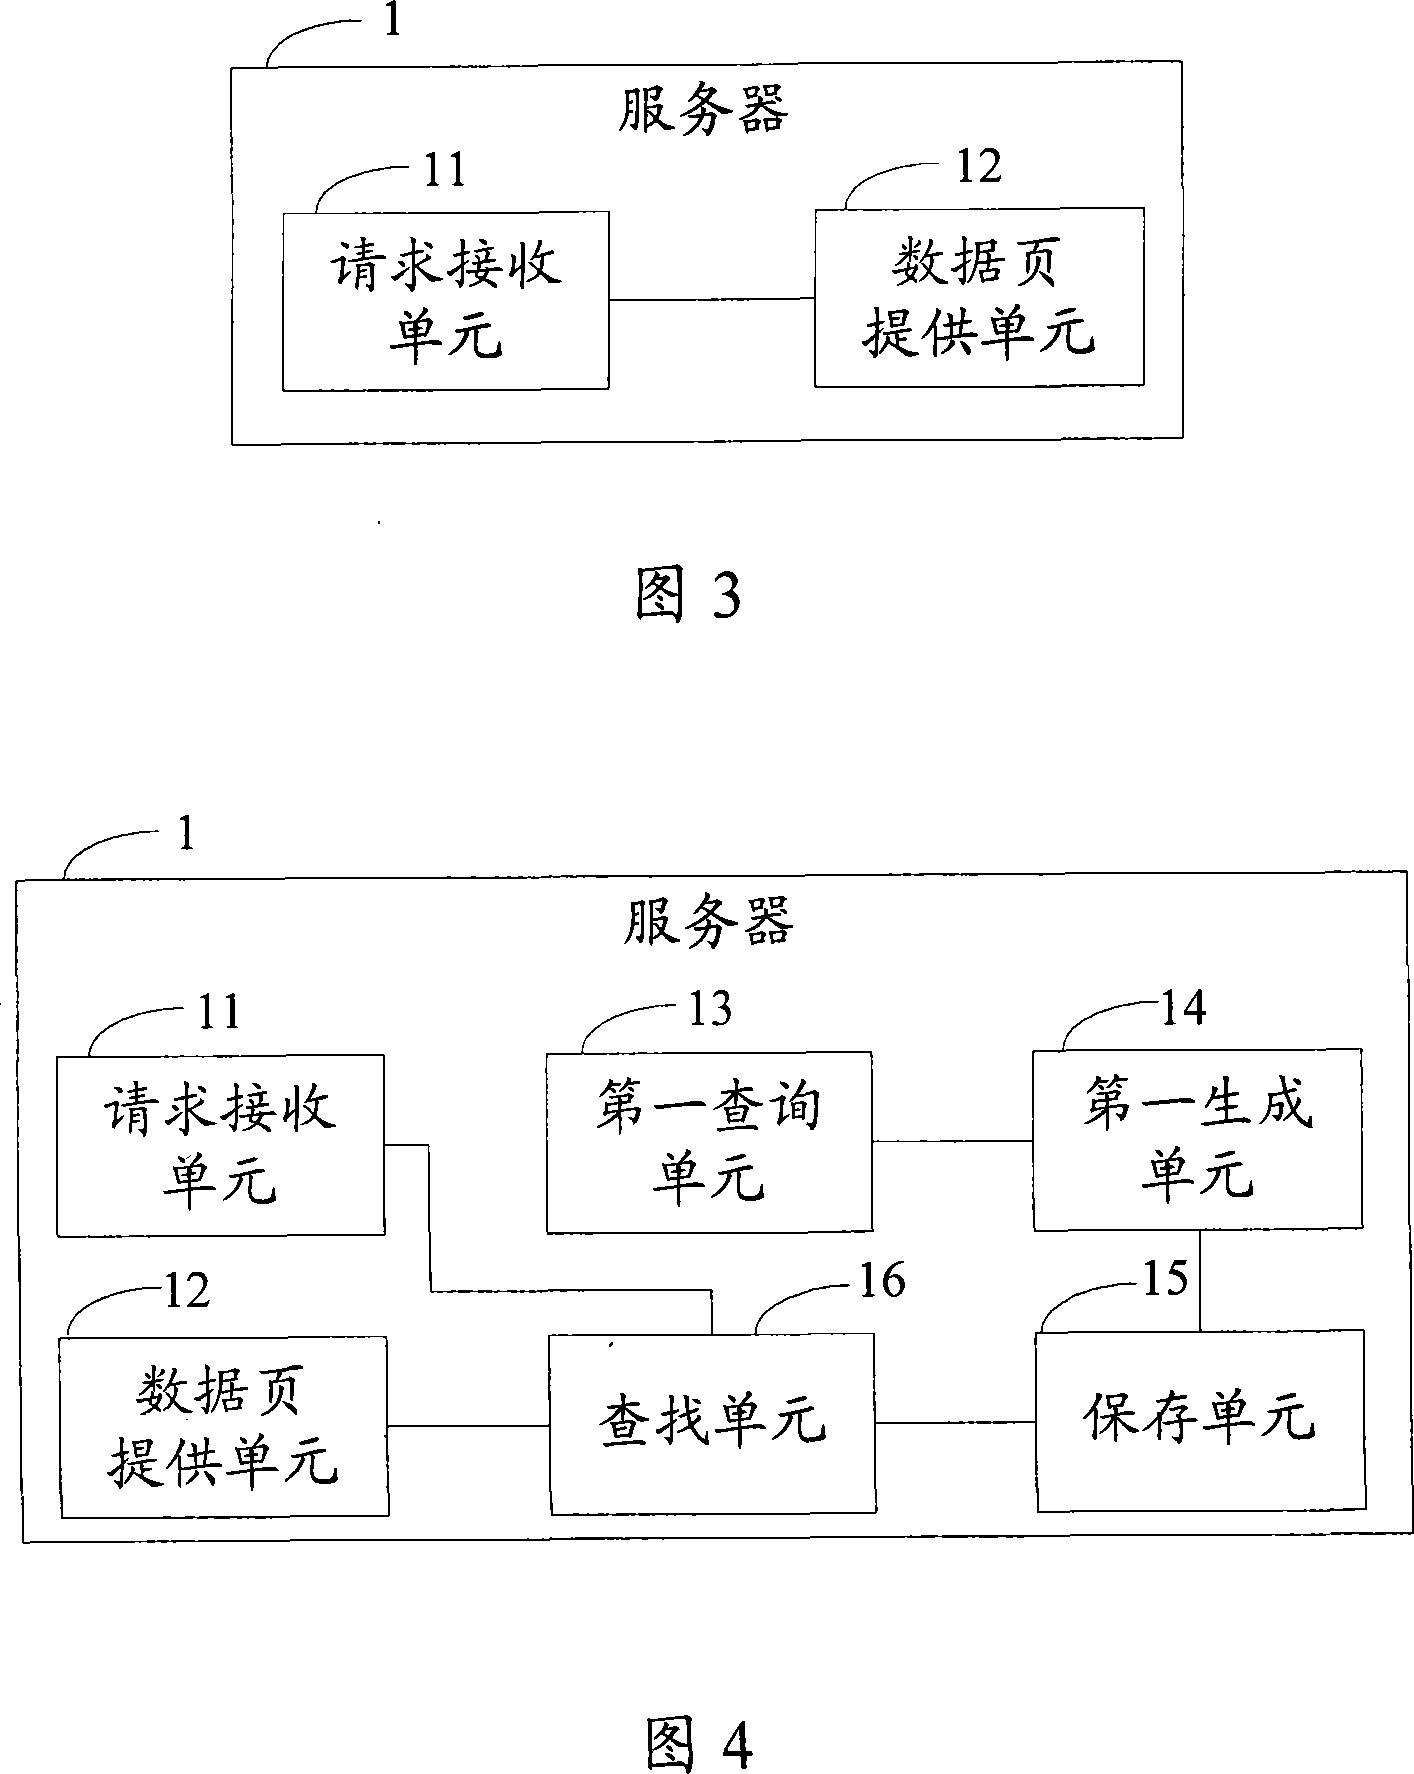 Method, device and system for providing and altering data on network page